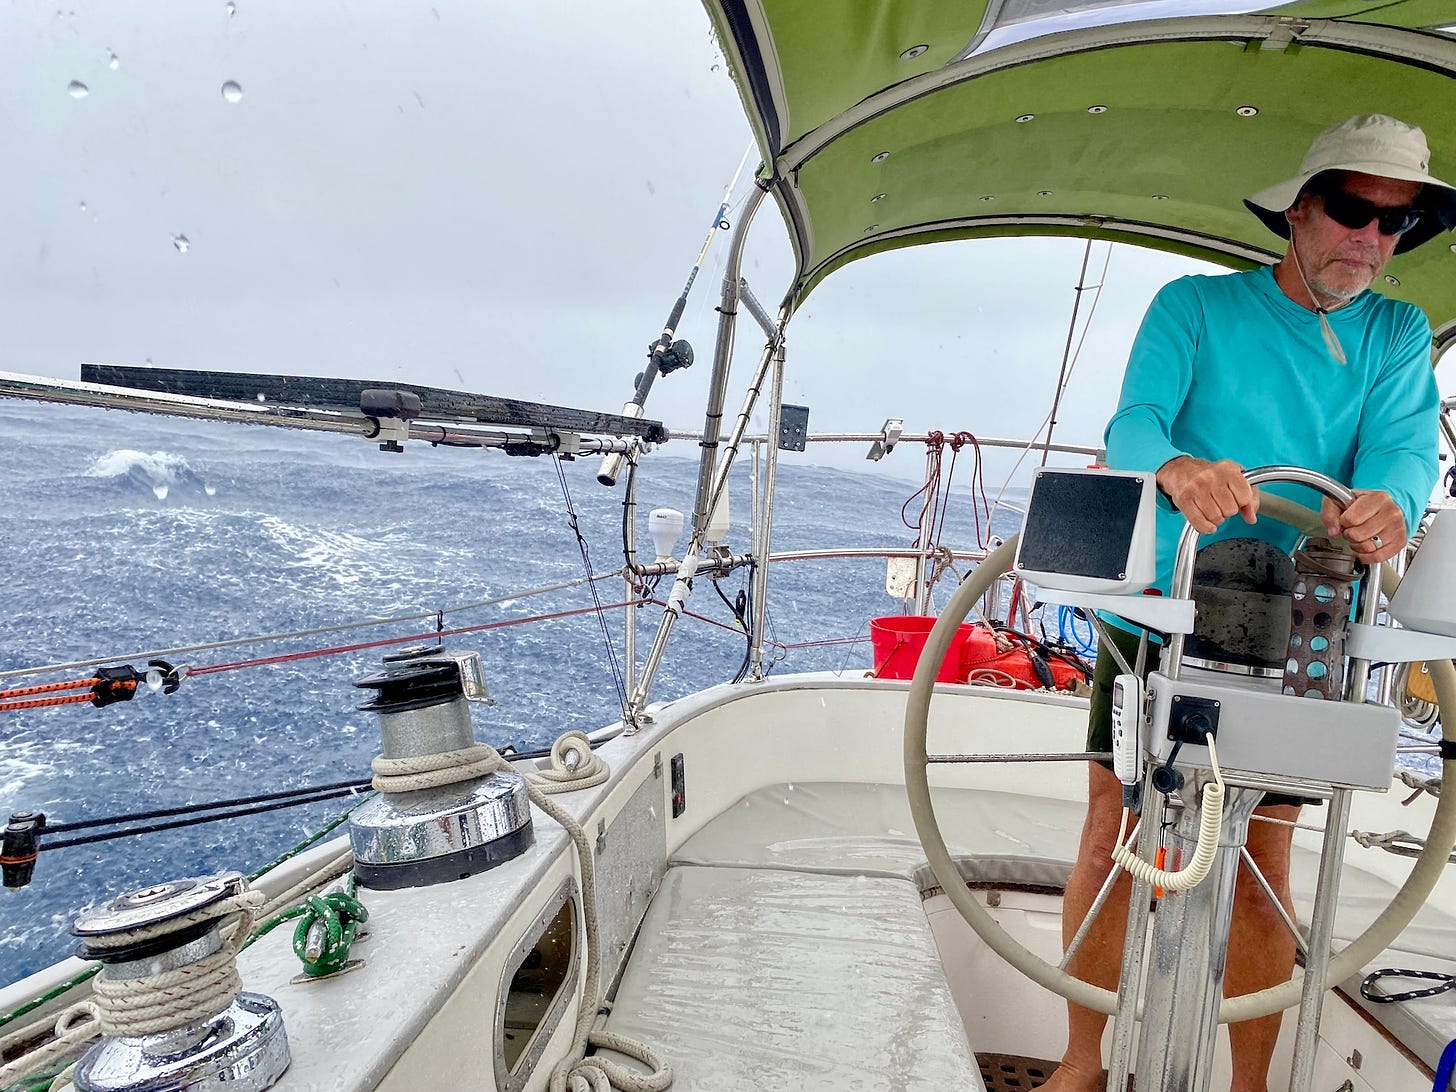 Image of a man at the helm of a sailboat on the ocean, while a squall pours heavy rain on the cockpit